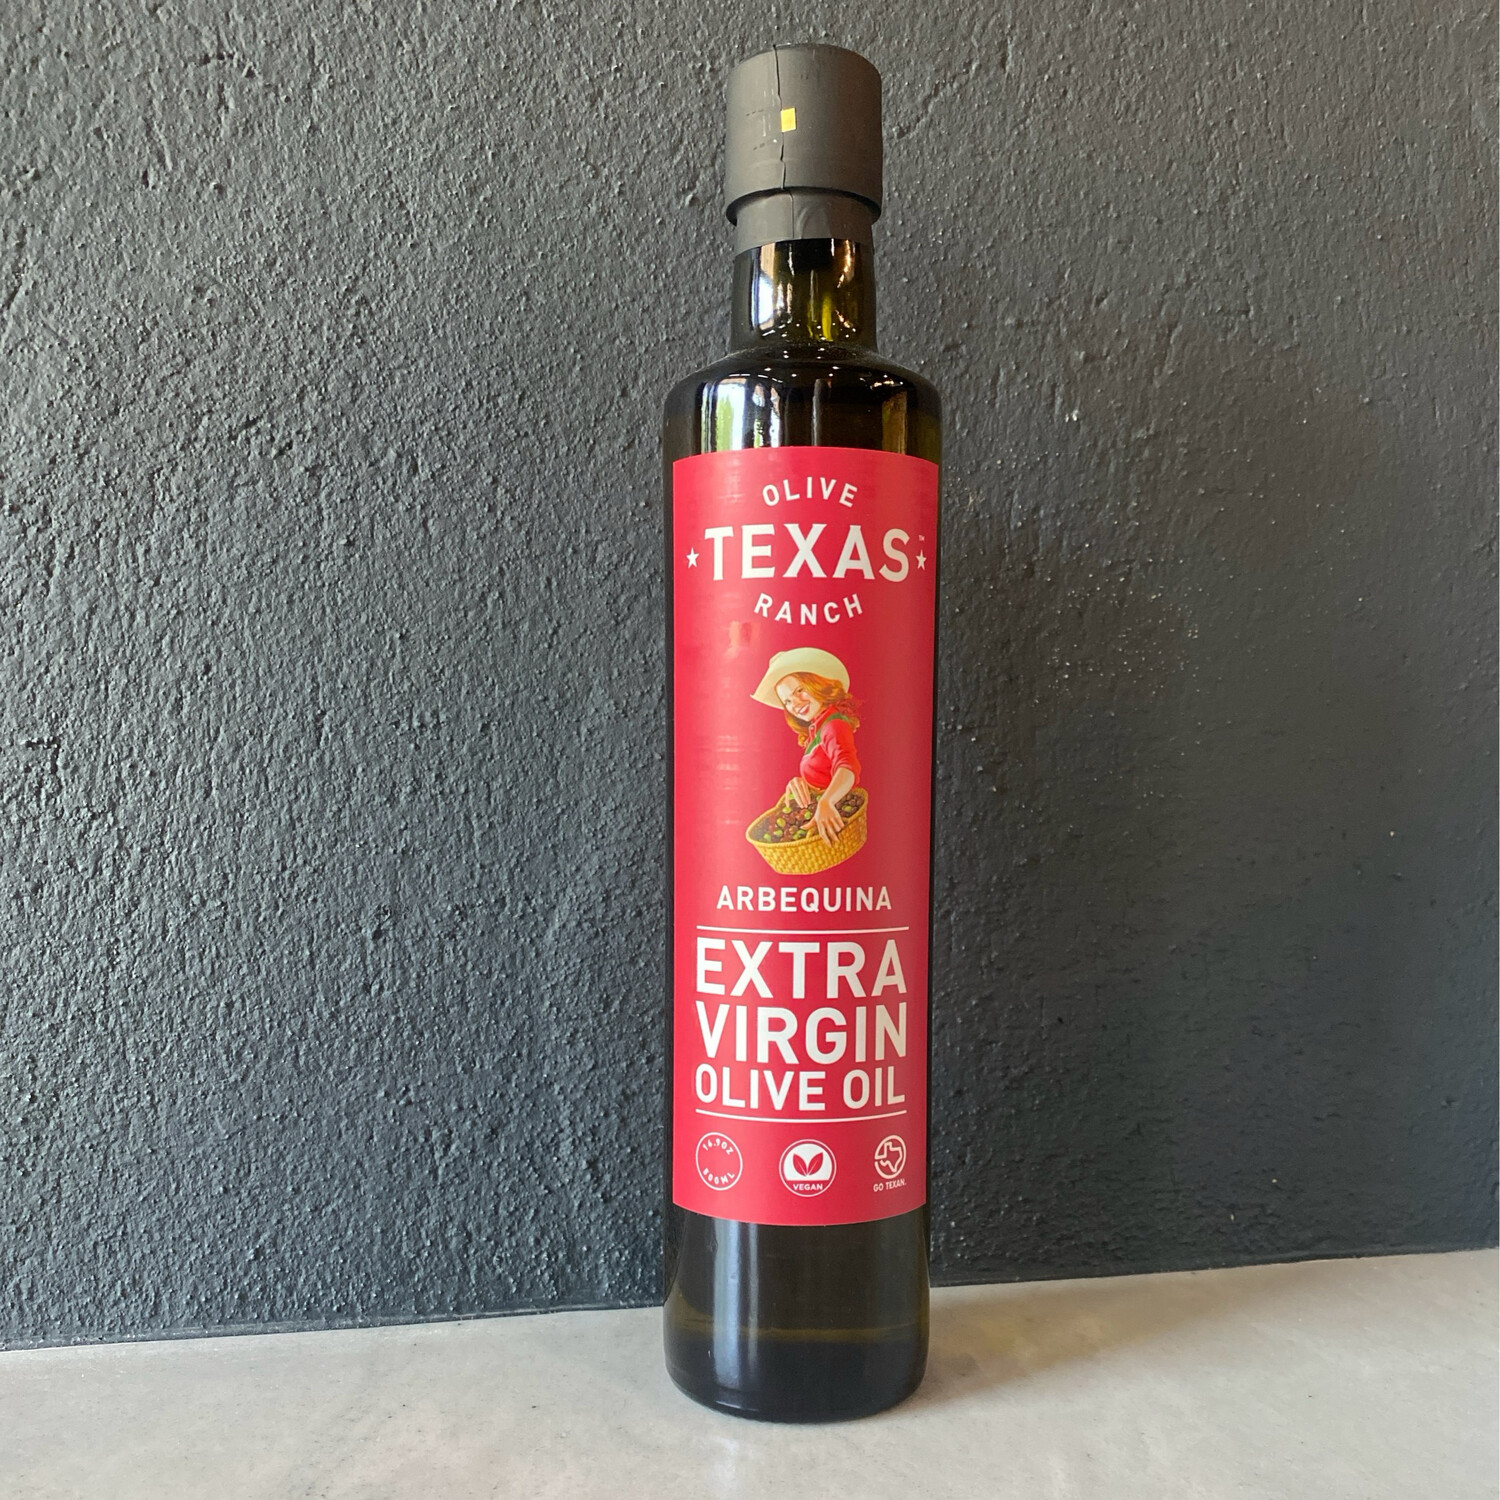 TX Olive Ranch Olive Oil 500ml